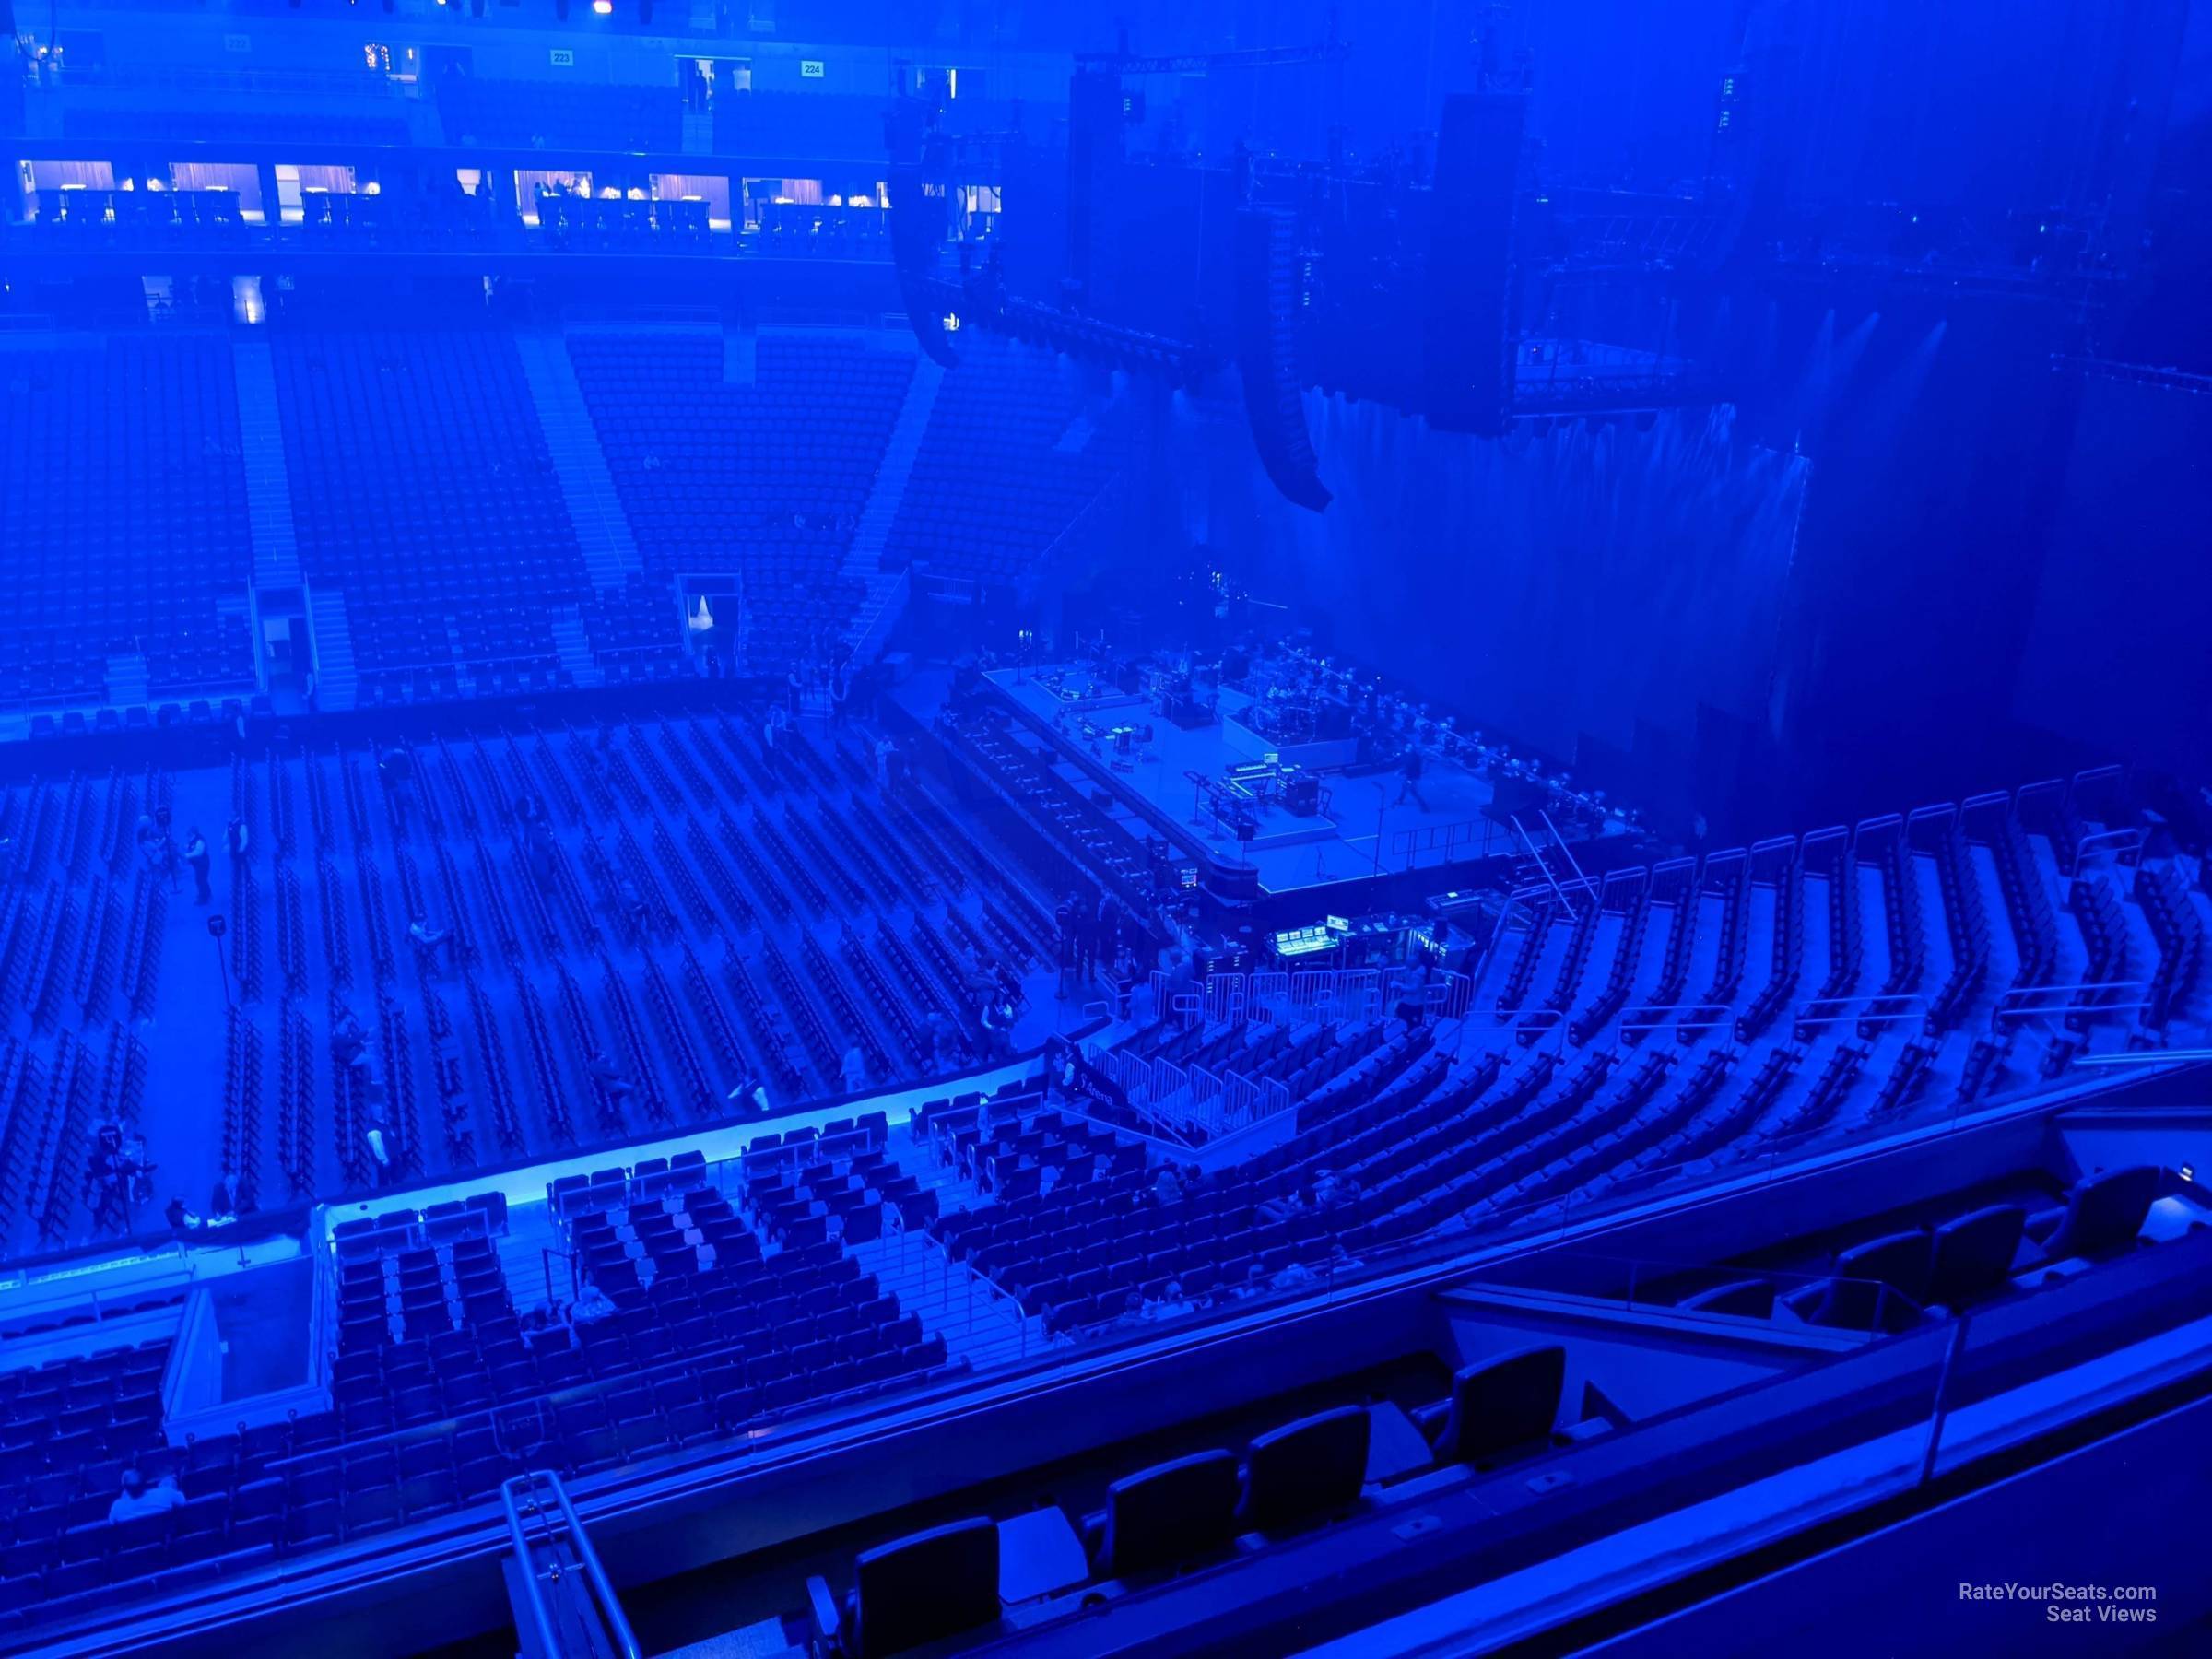 section 205, row 2 seat view  for concert - ubs arena